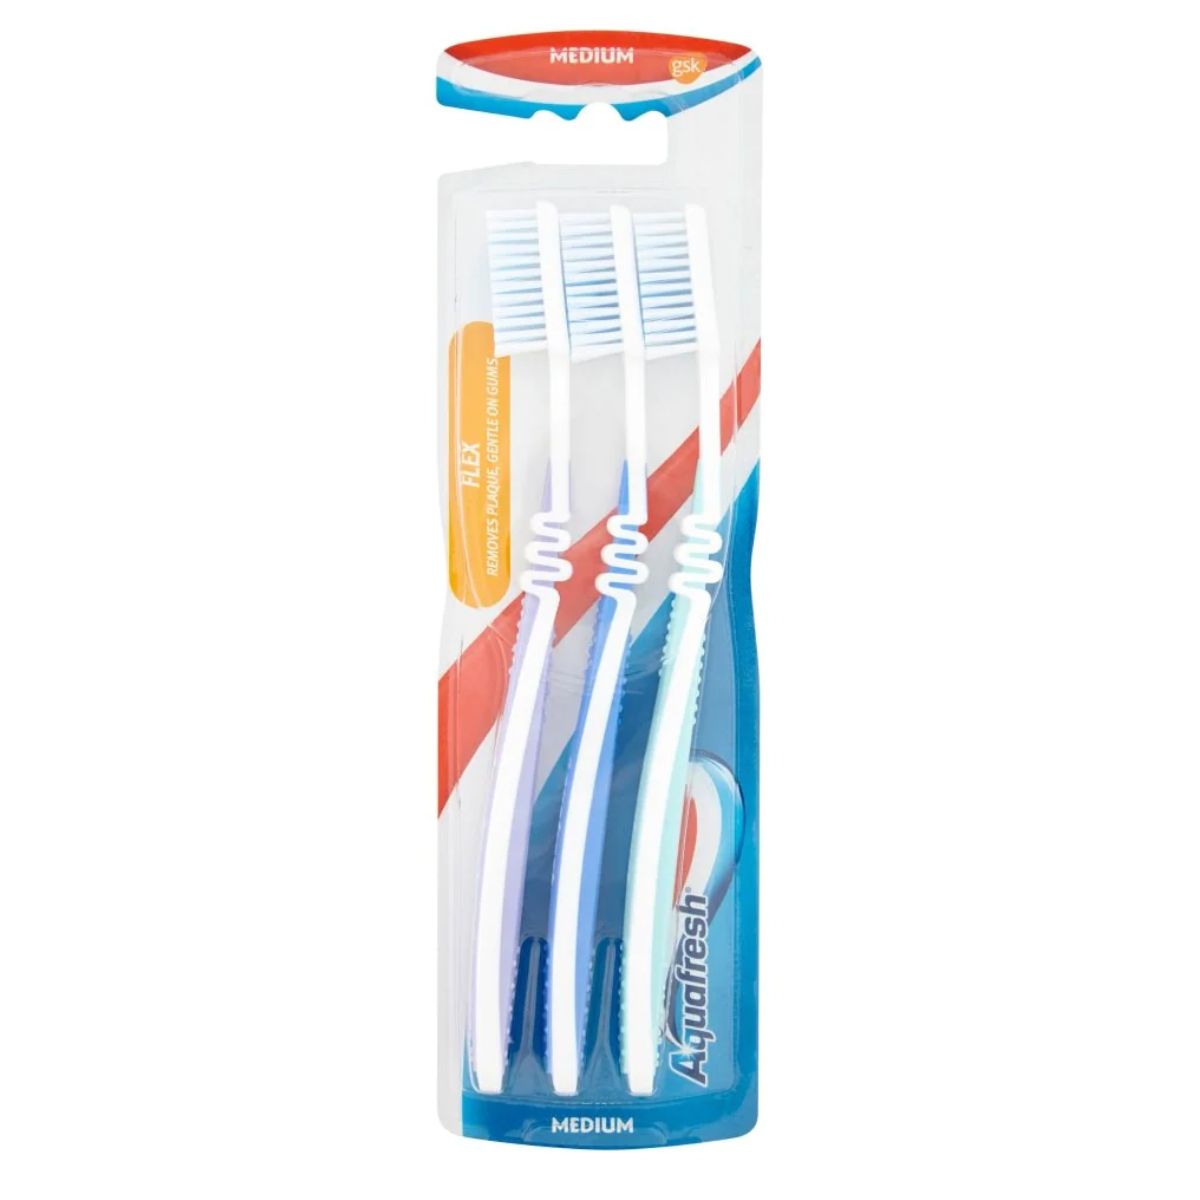 A pack of three Aquafresh toothbrushes in a package.